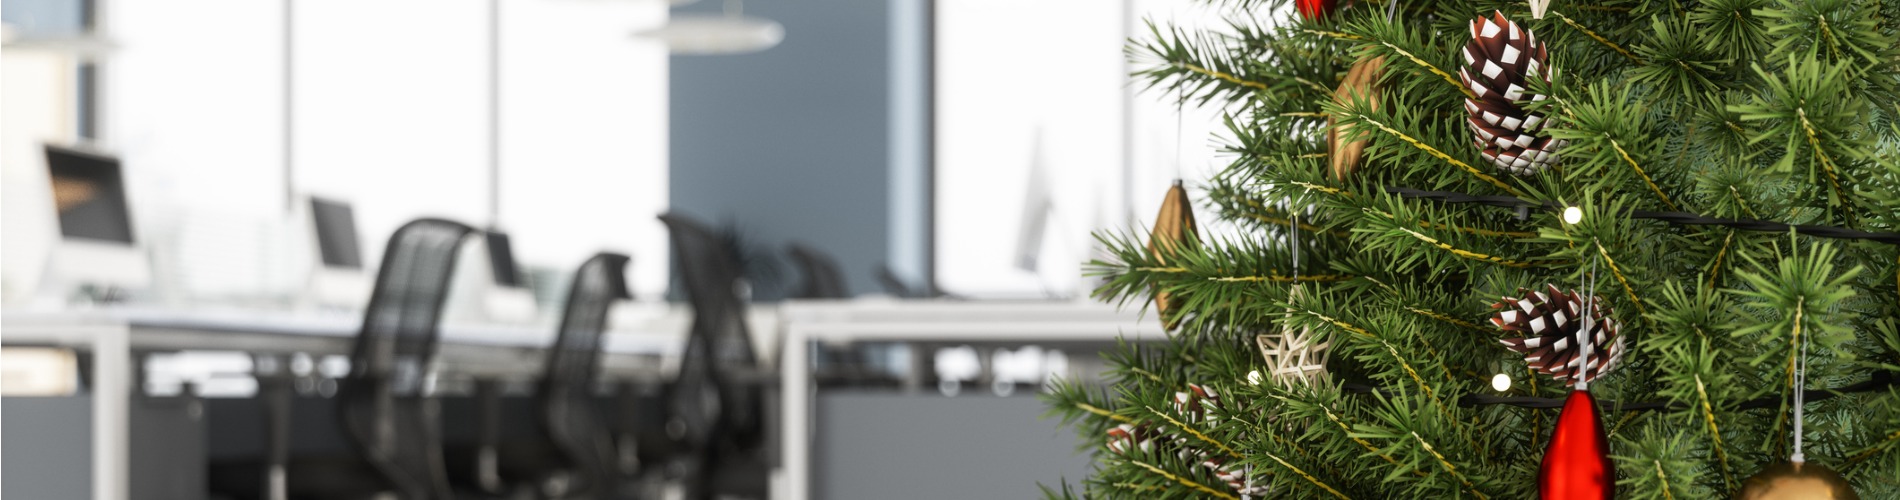 christmas-tree-with-ornaments-and-gift-boxes-in-the-office 1900x500